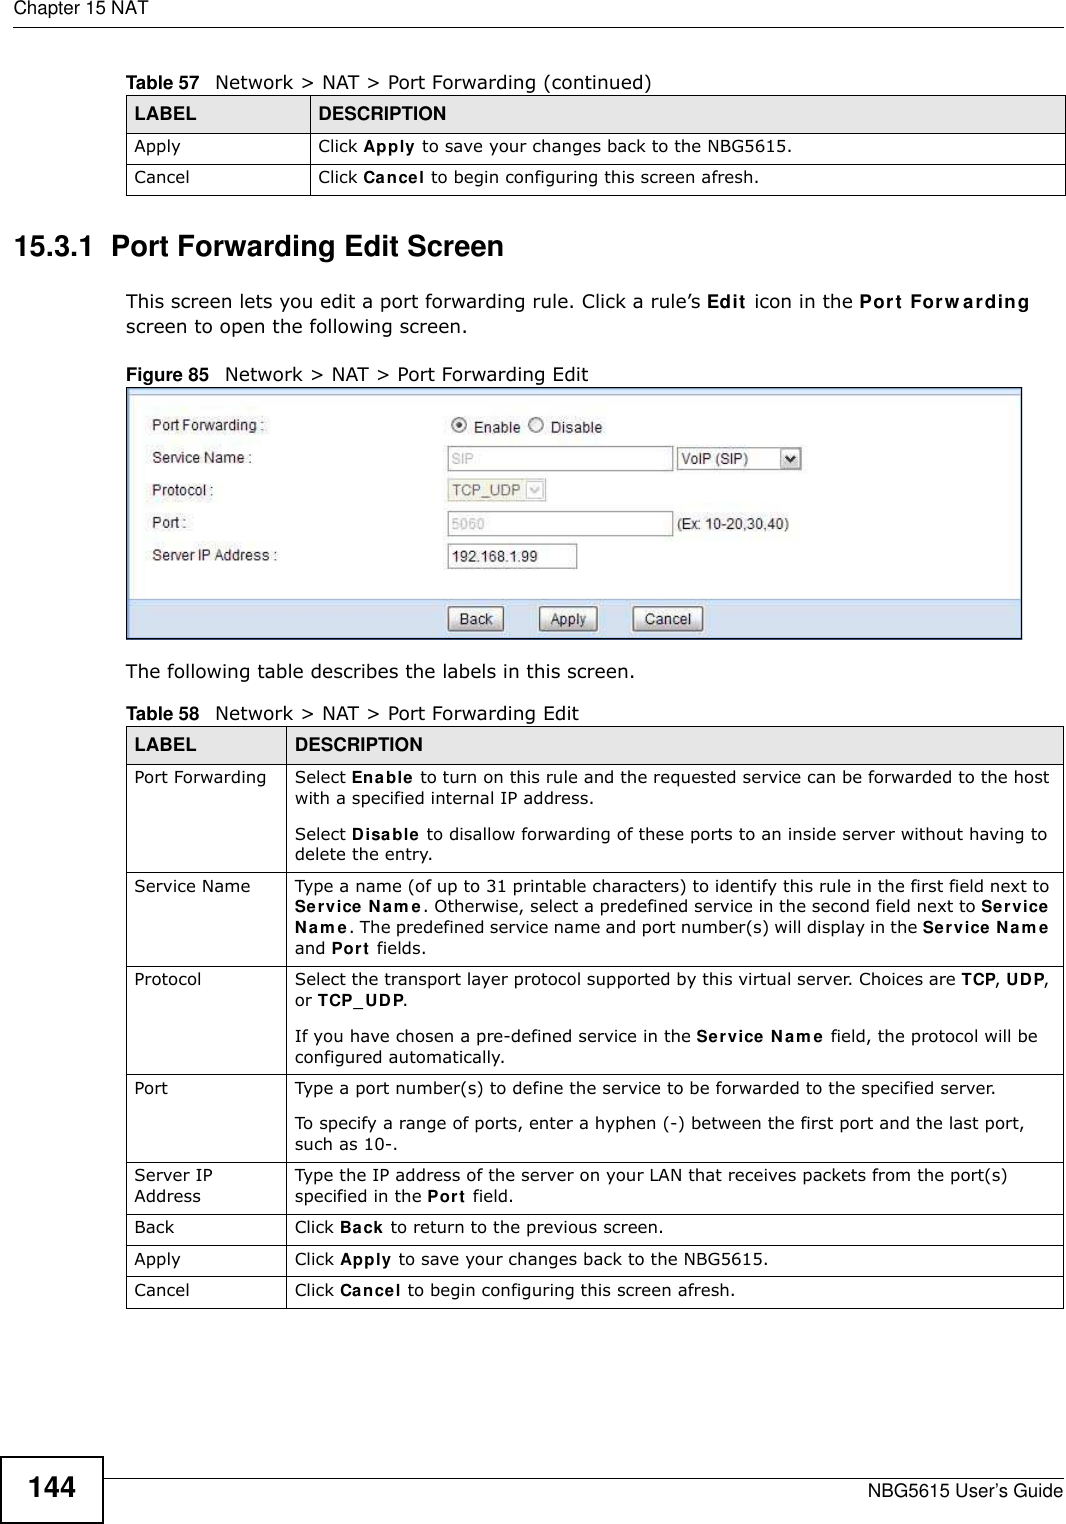 Chapter 15 NATNBG5615 User’s Guide14415.3.1  Port Forwarding Edit Screen This screen lets you edit a port forwarding rule. Click a rule’s Edit icon in the Port Forw arding screen to open the following screen.Figure 85   Network &gt; NAT &gt; Port Forwarding Edit The following table describes the labels in this screen. Apply Click Apply to save your changes back to the NBG5615.Cancel Click Cancel to begin configuring this screen afresh.Table 57   Network &gt; NAT &gt; Port Forwarding (continued)LABEL DESCRIPTIONTable 58   Network &gt; NAT &gt; Port Forwarding EditLABEL DESCRIPTIONPort Forwarding Select Enable to turn on this rule and the requested service can be forwarded to the host with a specified internal IP address.Select Disable to disallow forwarding of these ports to an inside server without having to delete the entry. Service Name Type a name (of up to 31 printable characters) to identify this rule in the first field next to Service Nam e. Otherwise, select a predefined service in the second field next to Service Nam e. The predefined service name and port number(s) will display in the Service Nam e and Port fields.Protocol Select the transport layer protocol supported by this virtual server. Choices are TCP, UDP, or TCP_UDP. If you have chosen a pre-defined service in the Service Nam e field, the protocol will be configured automatically.Port Type a port number(s) to define the service to be forwarded to the specified server.To specify a range of ports, enter a hyphen (-) between the first port and the last port, such as 10-.Server IP AddressType the IP address of the server on your LAN that receives packets from the port(s) specified in the Port field.Back Click Back to return to the previous screen.Apply Click Apply to save your changes back to the NBG5615.Cancel Click Cancel to begin configuring this screen afresh.